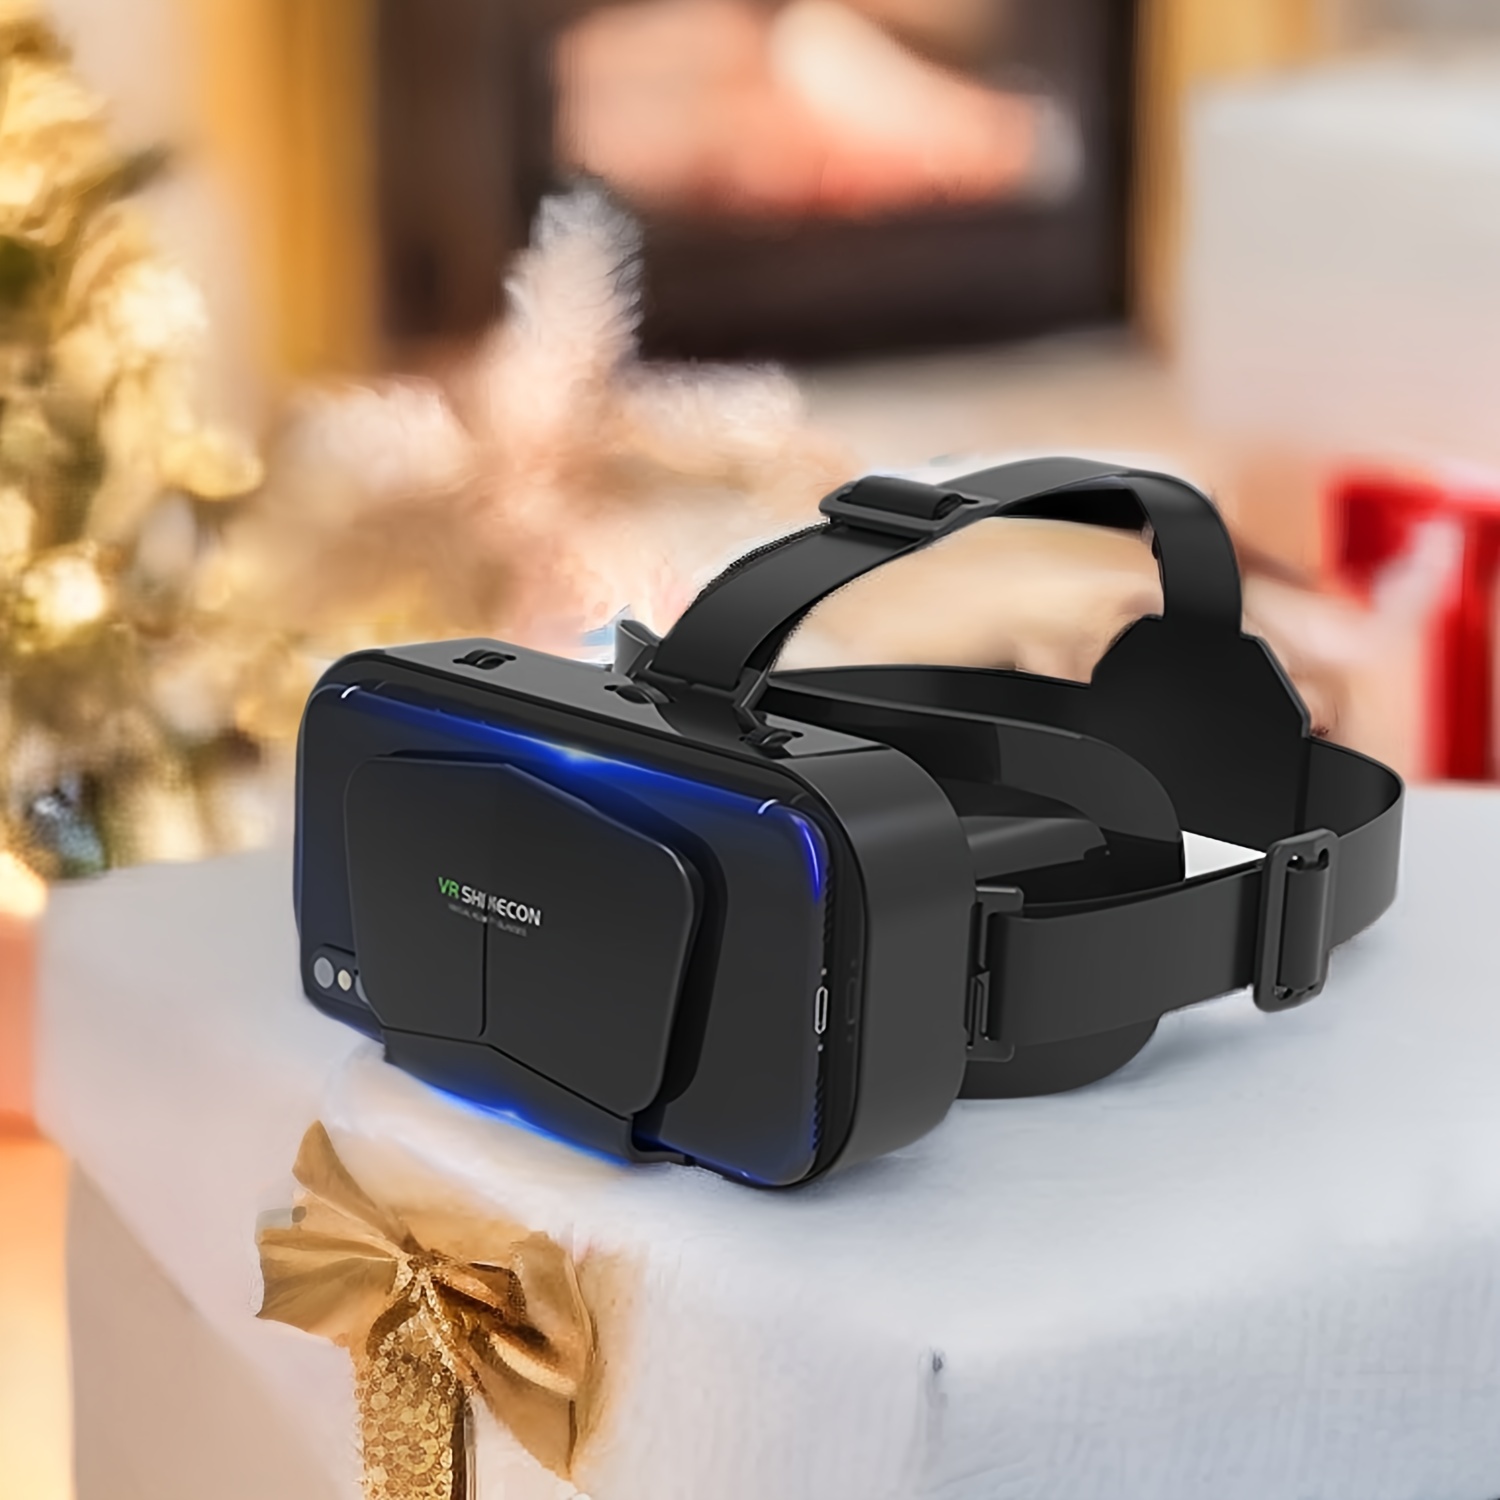  VR Glasses - Virtual Reality 3D Glasses Come with headphonesVr  Headset Virtual Reality Gear vr Roller Coaster Daydream viewmaster vr Box vr  Goggles (Color : Black) : Videojuegos